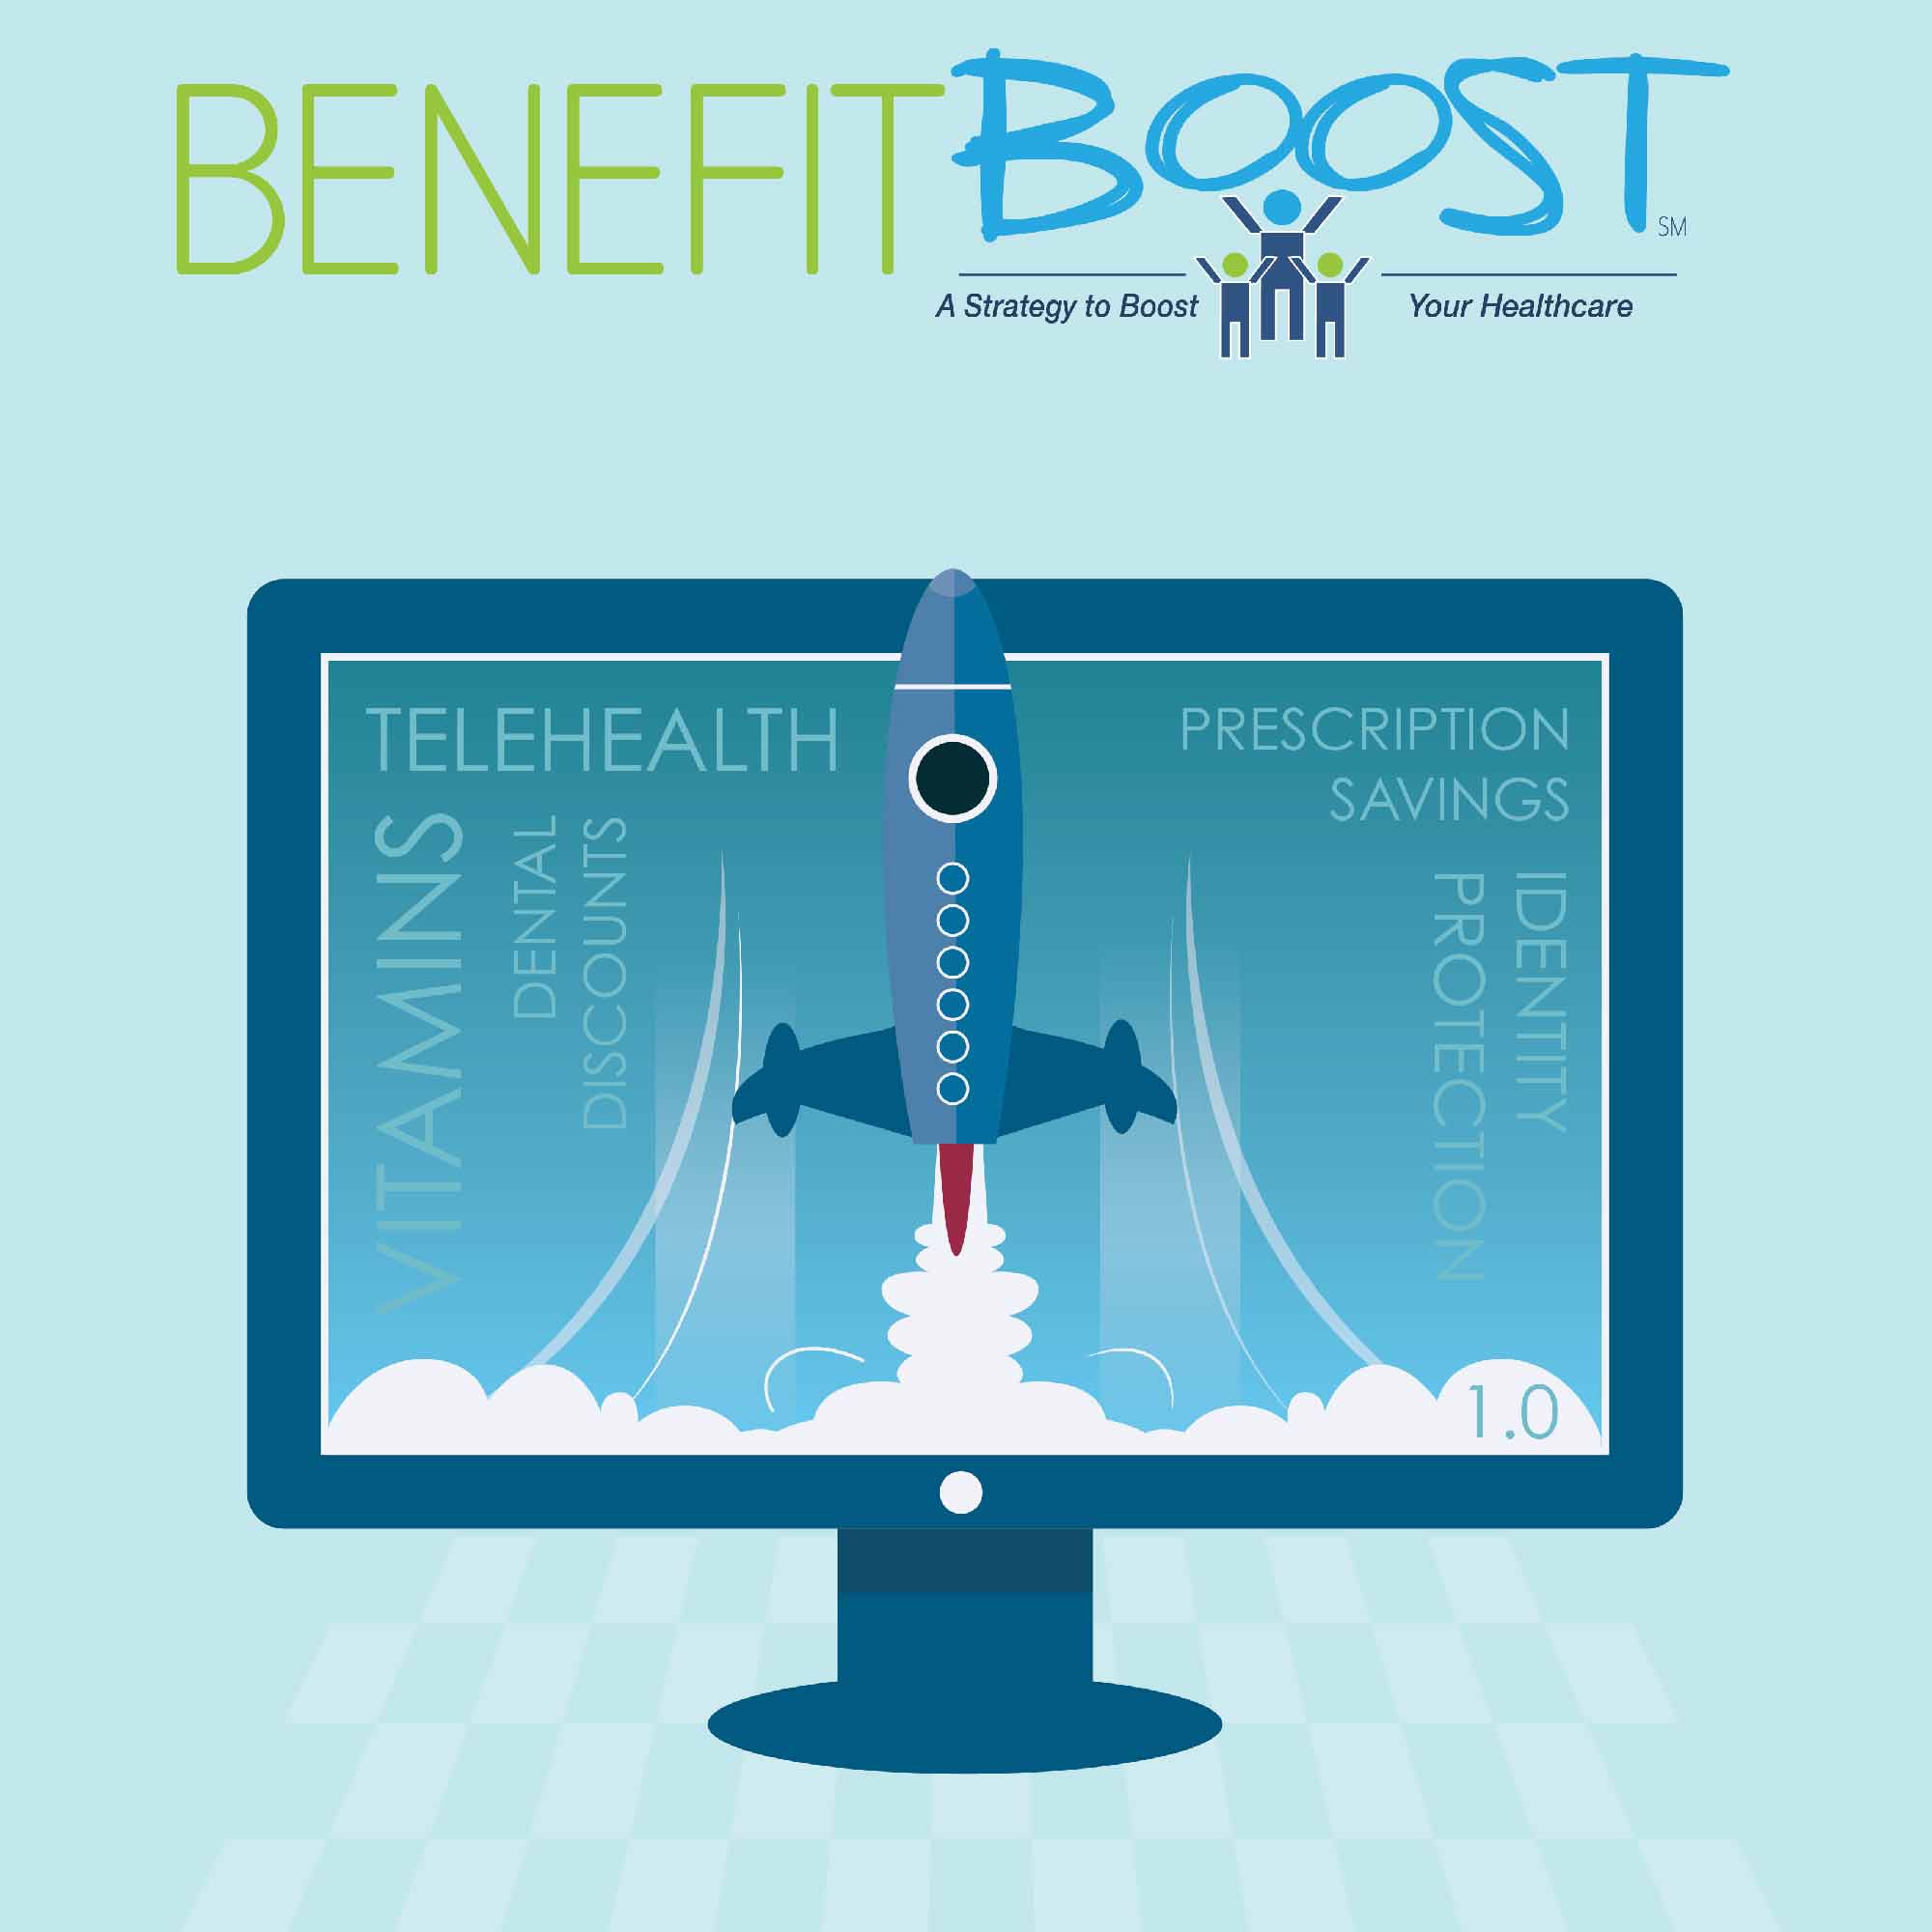 Benefit Boost 1.0, a Benefit Boost Subscription Product